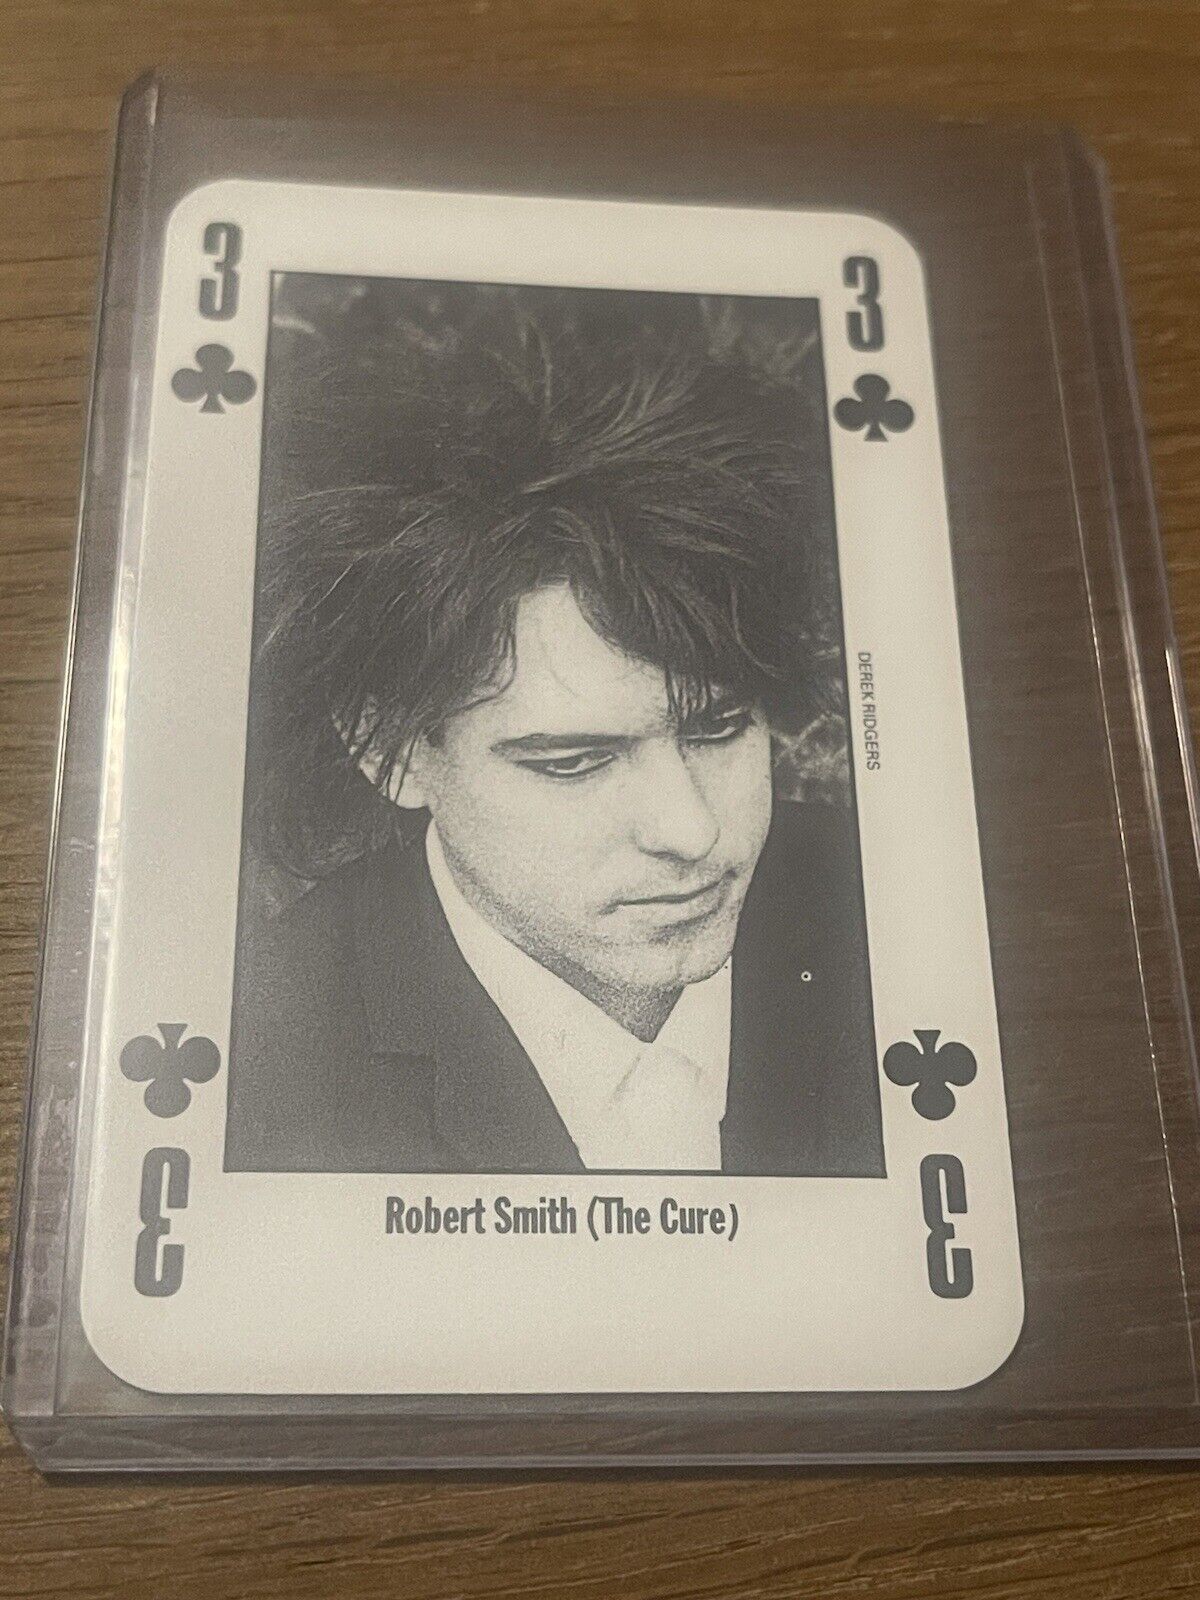 1992 New Musical Express NME Robert Smith THE CURE Card RARE MUSIC CARD NM-MINT